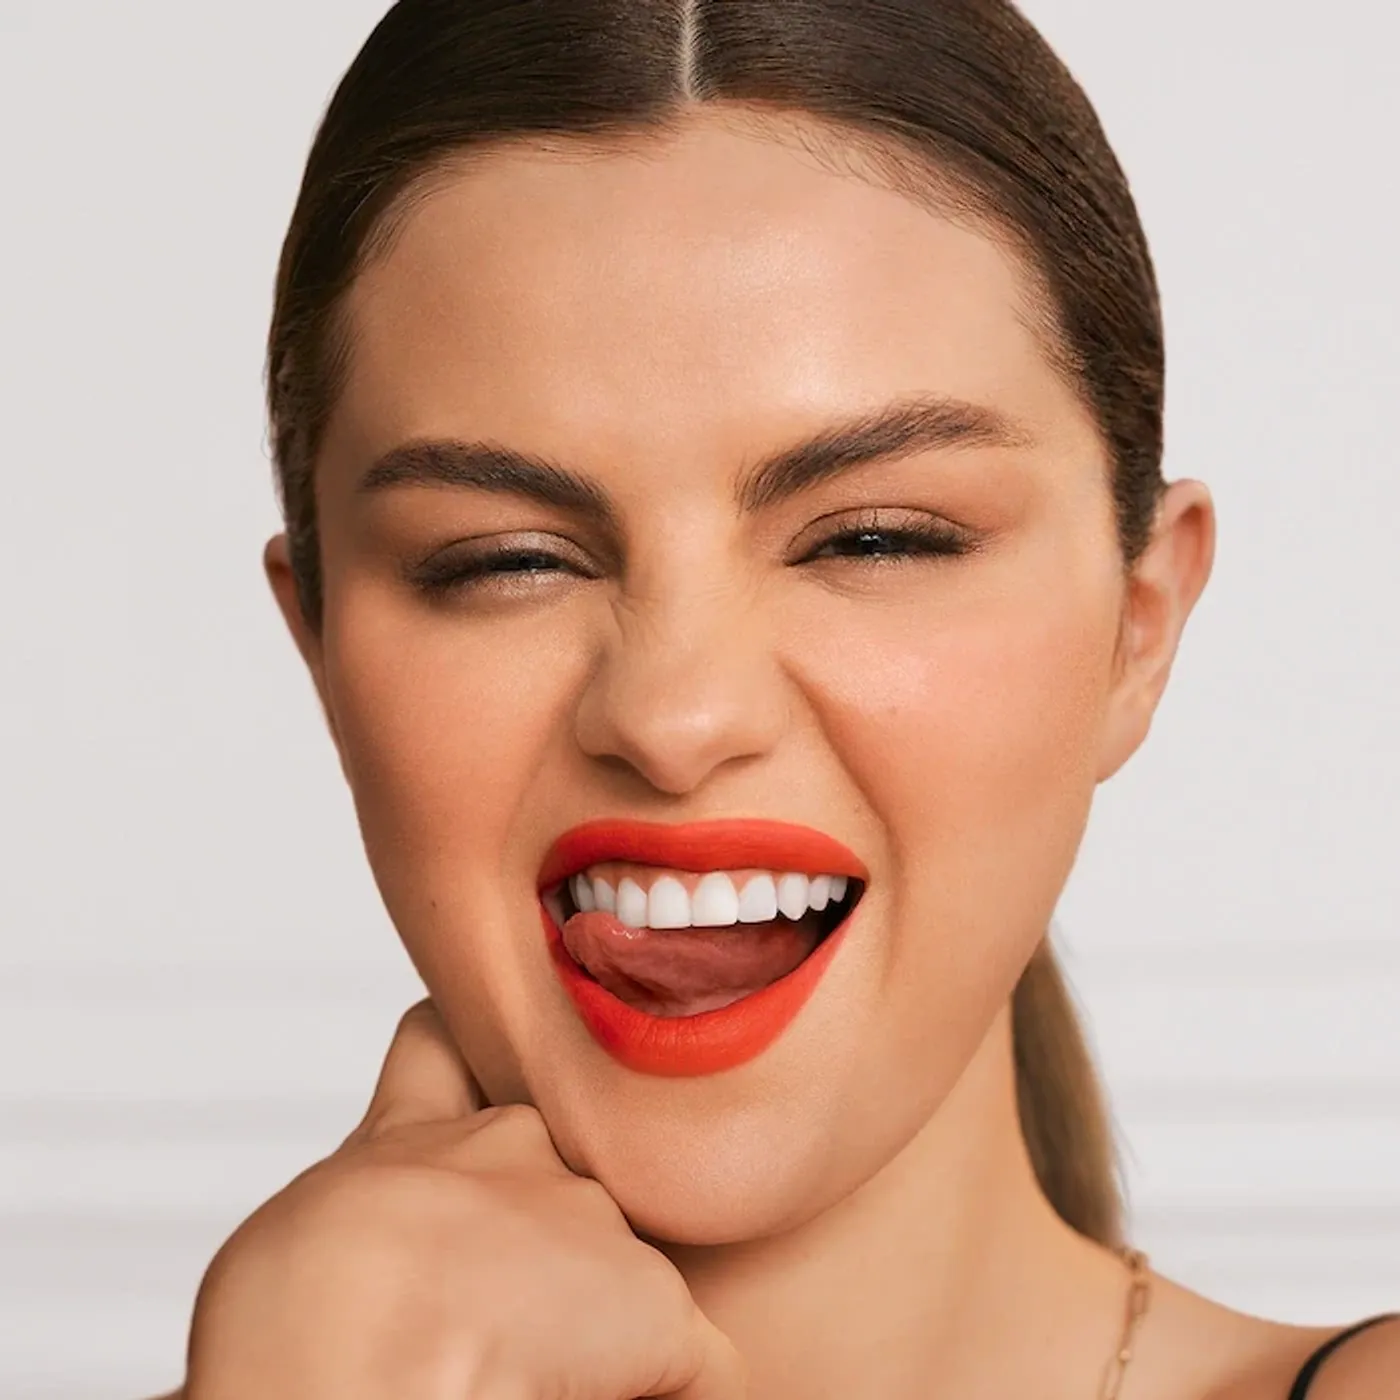 Selena Gomez wearing red lipstick from Rare Beauty